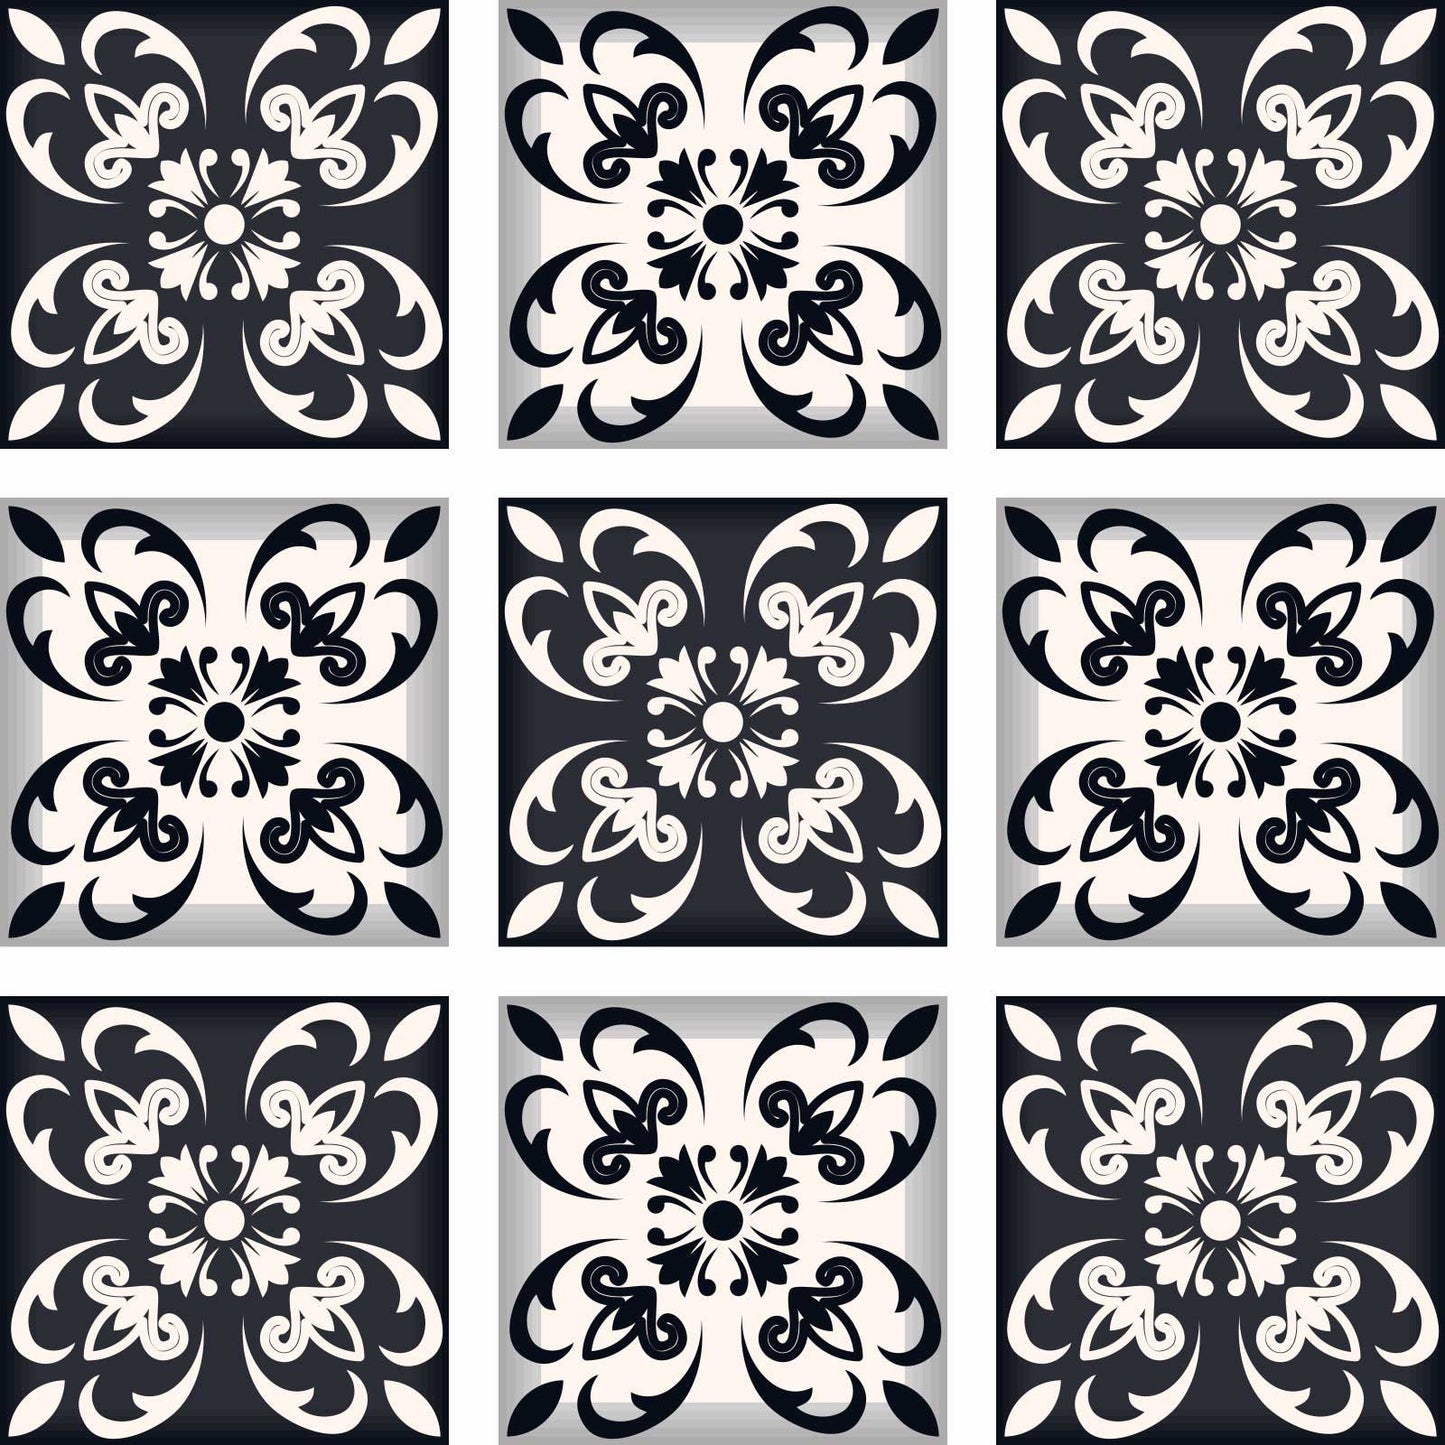 4" X 4" Black And White Quatro Peel And Stick Removable Tiles